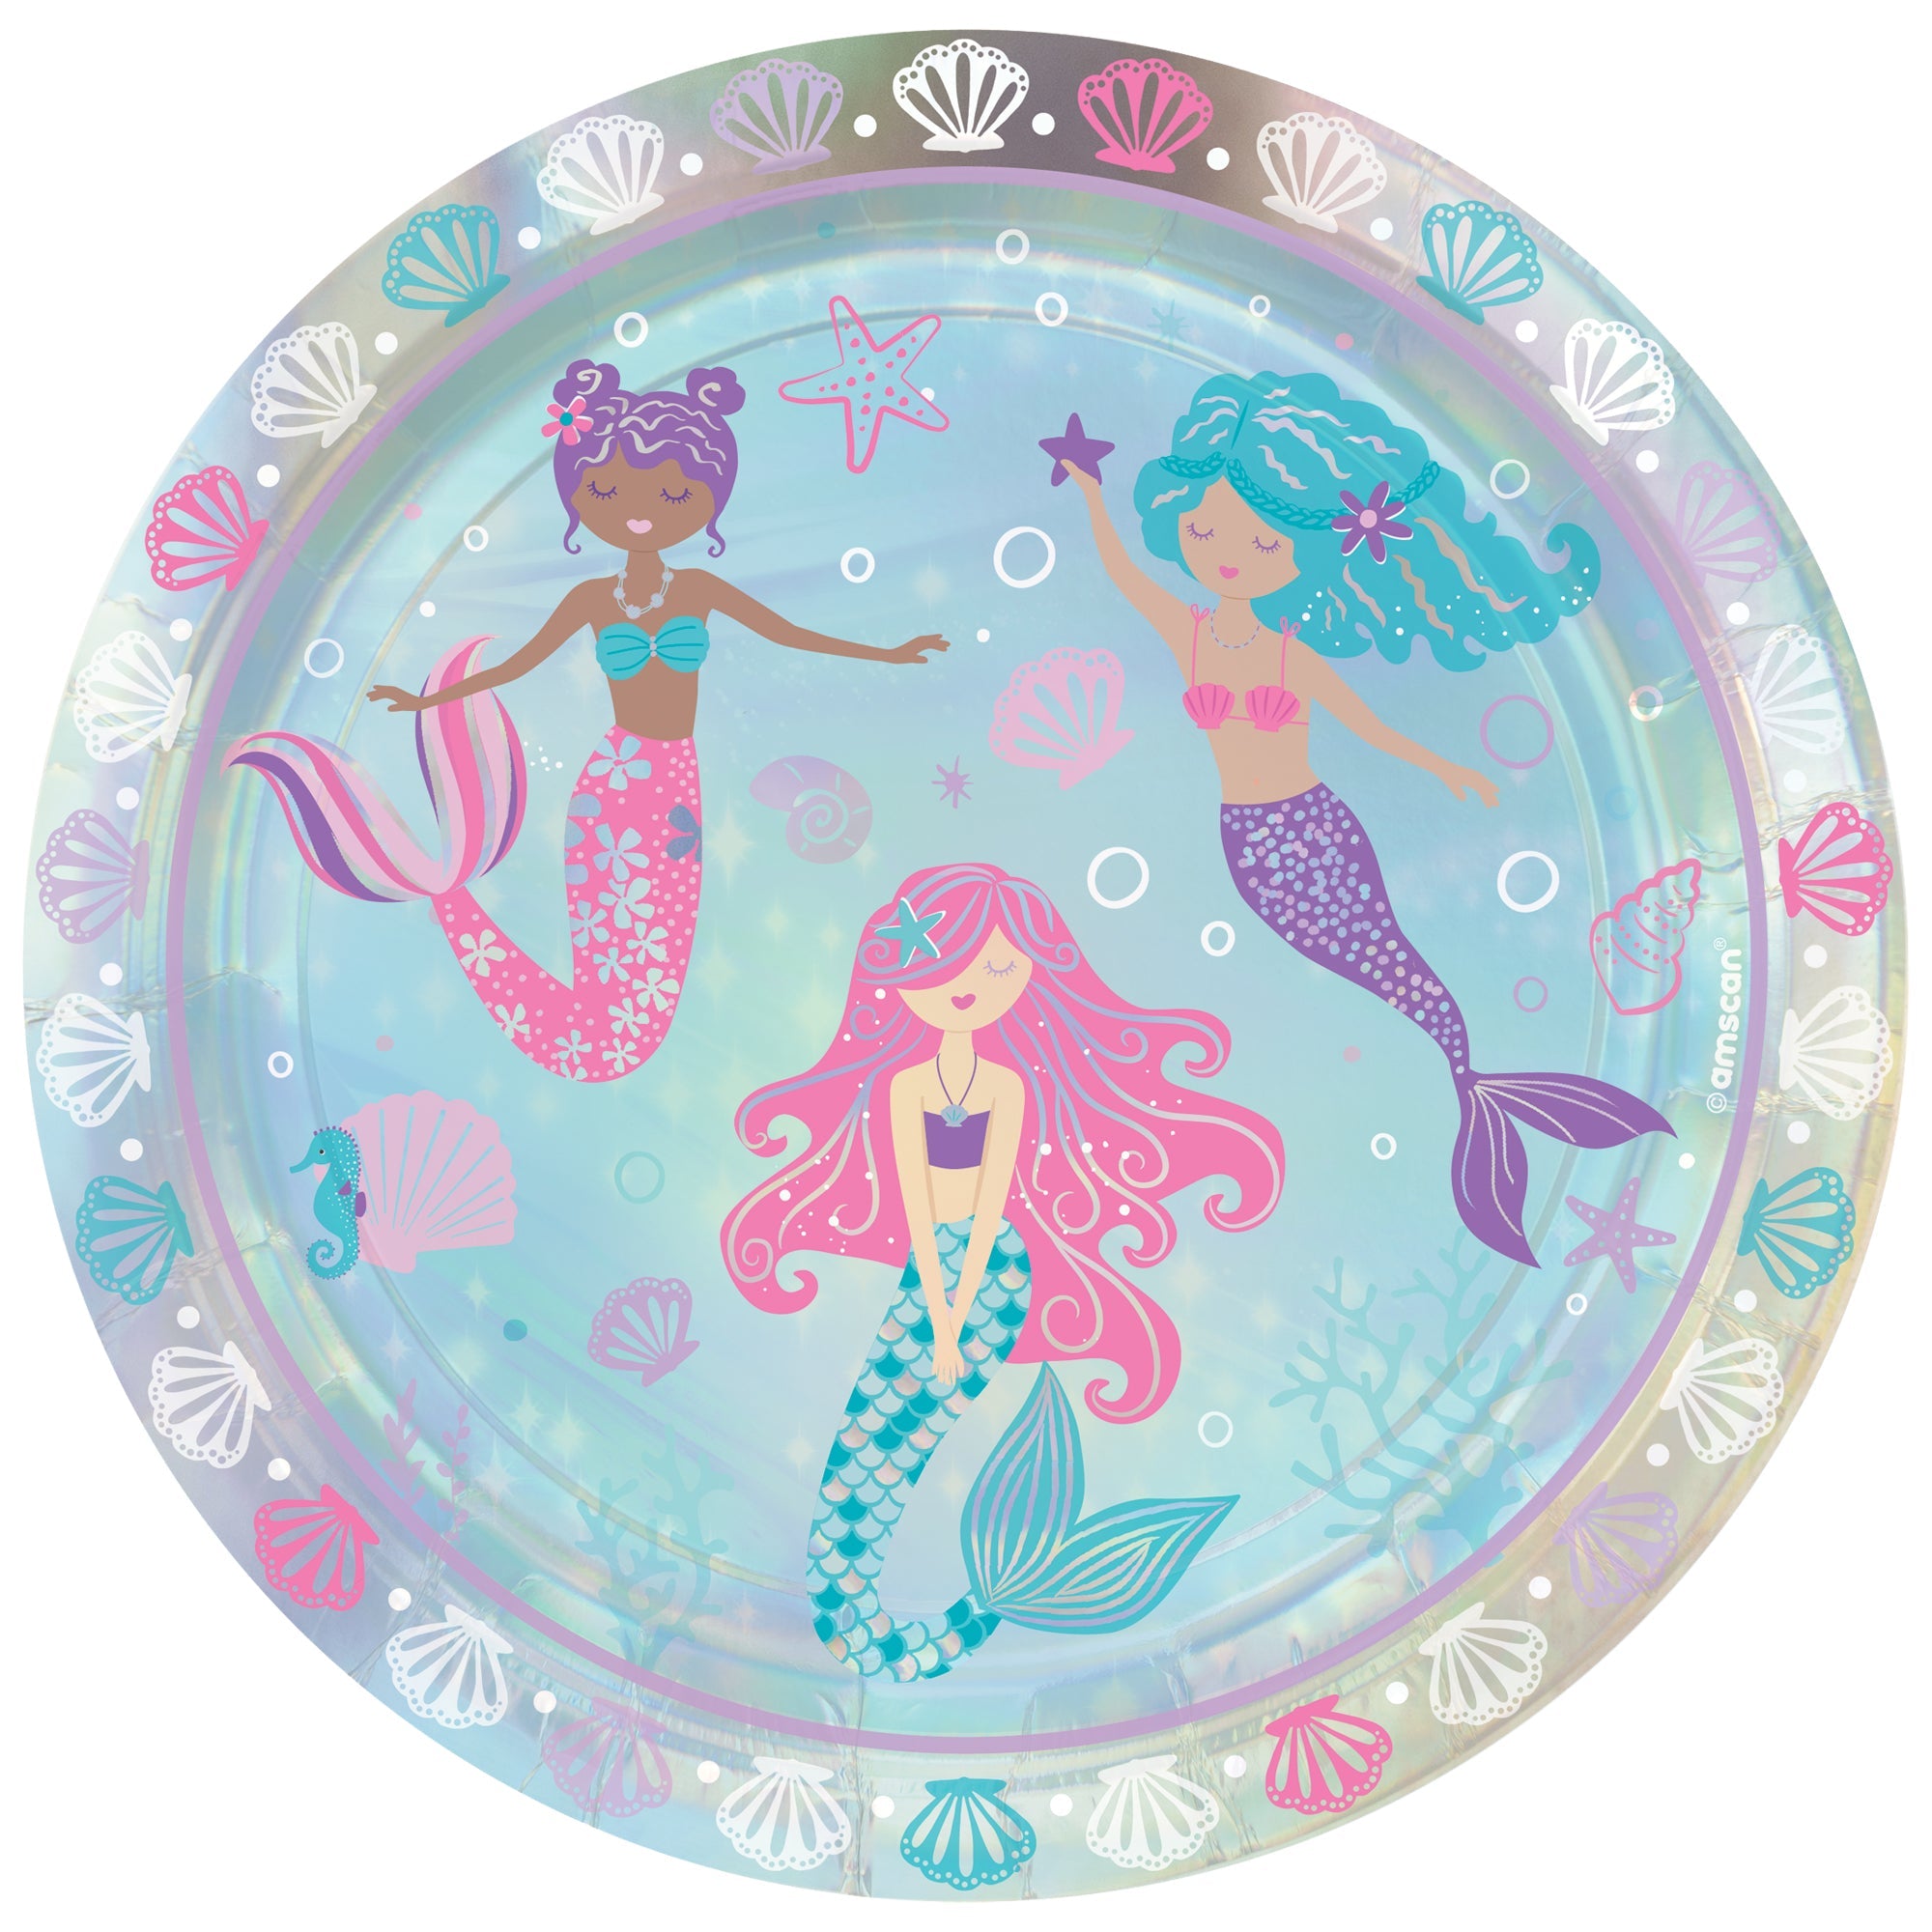 Shimmering Mermaids 9" Iridescent Round Plates Package of 8